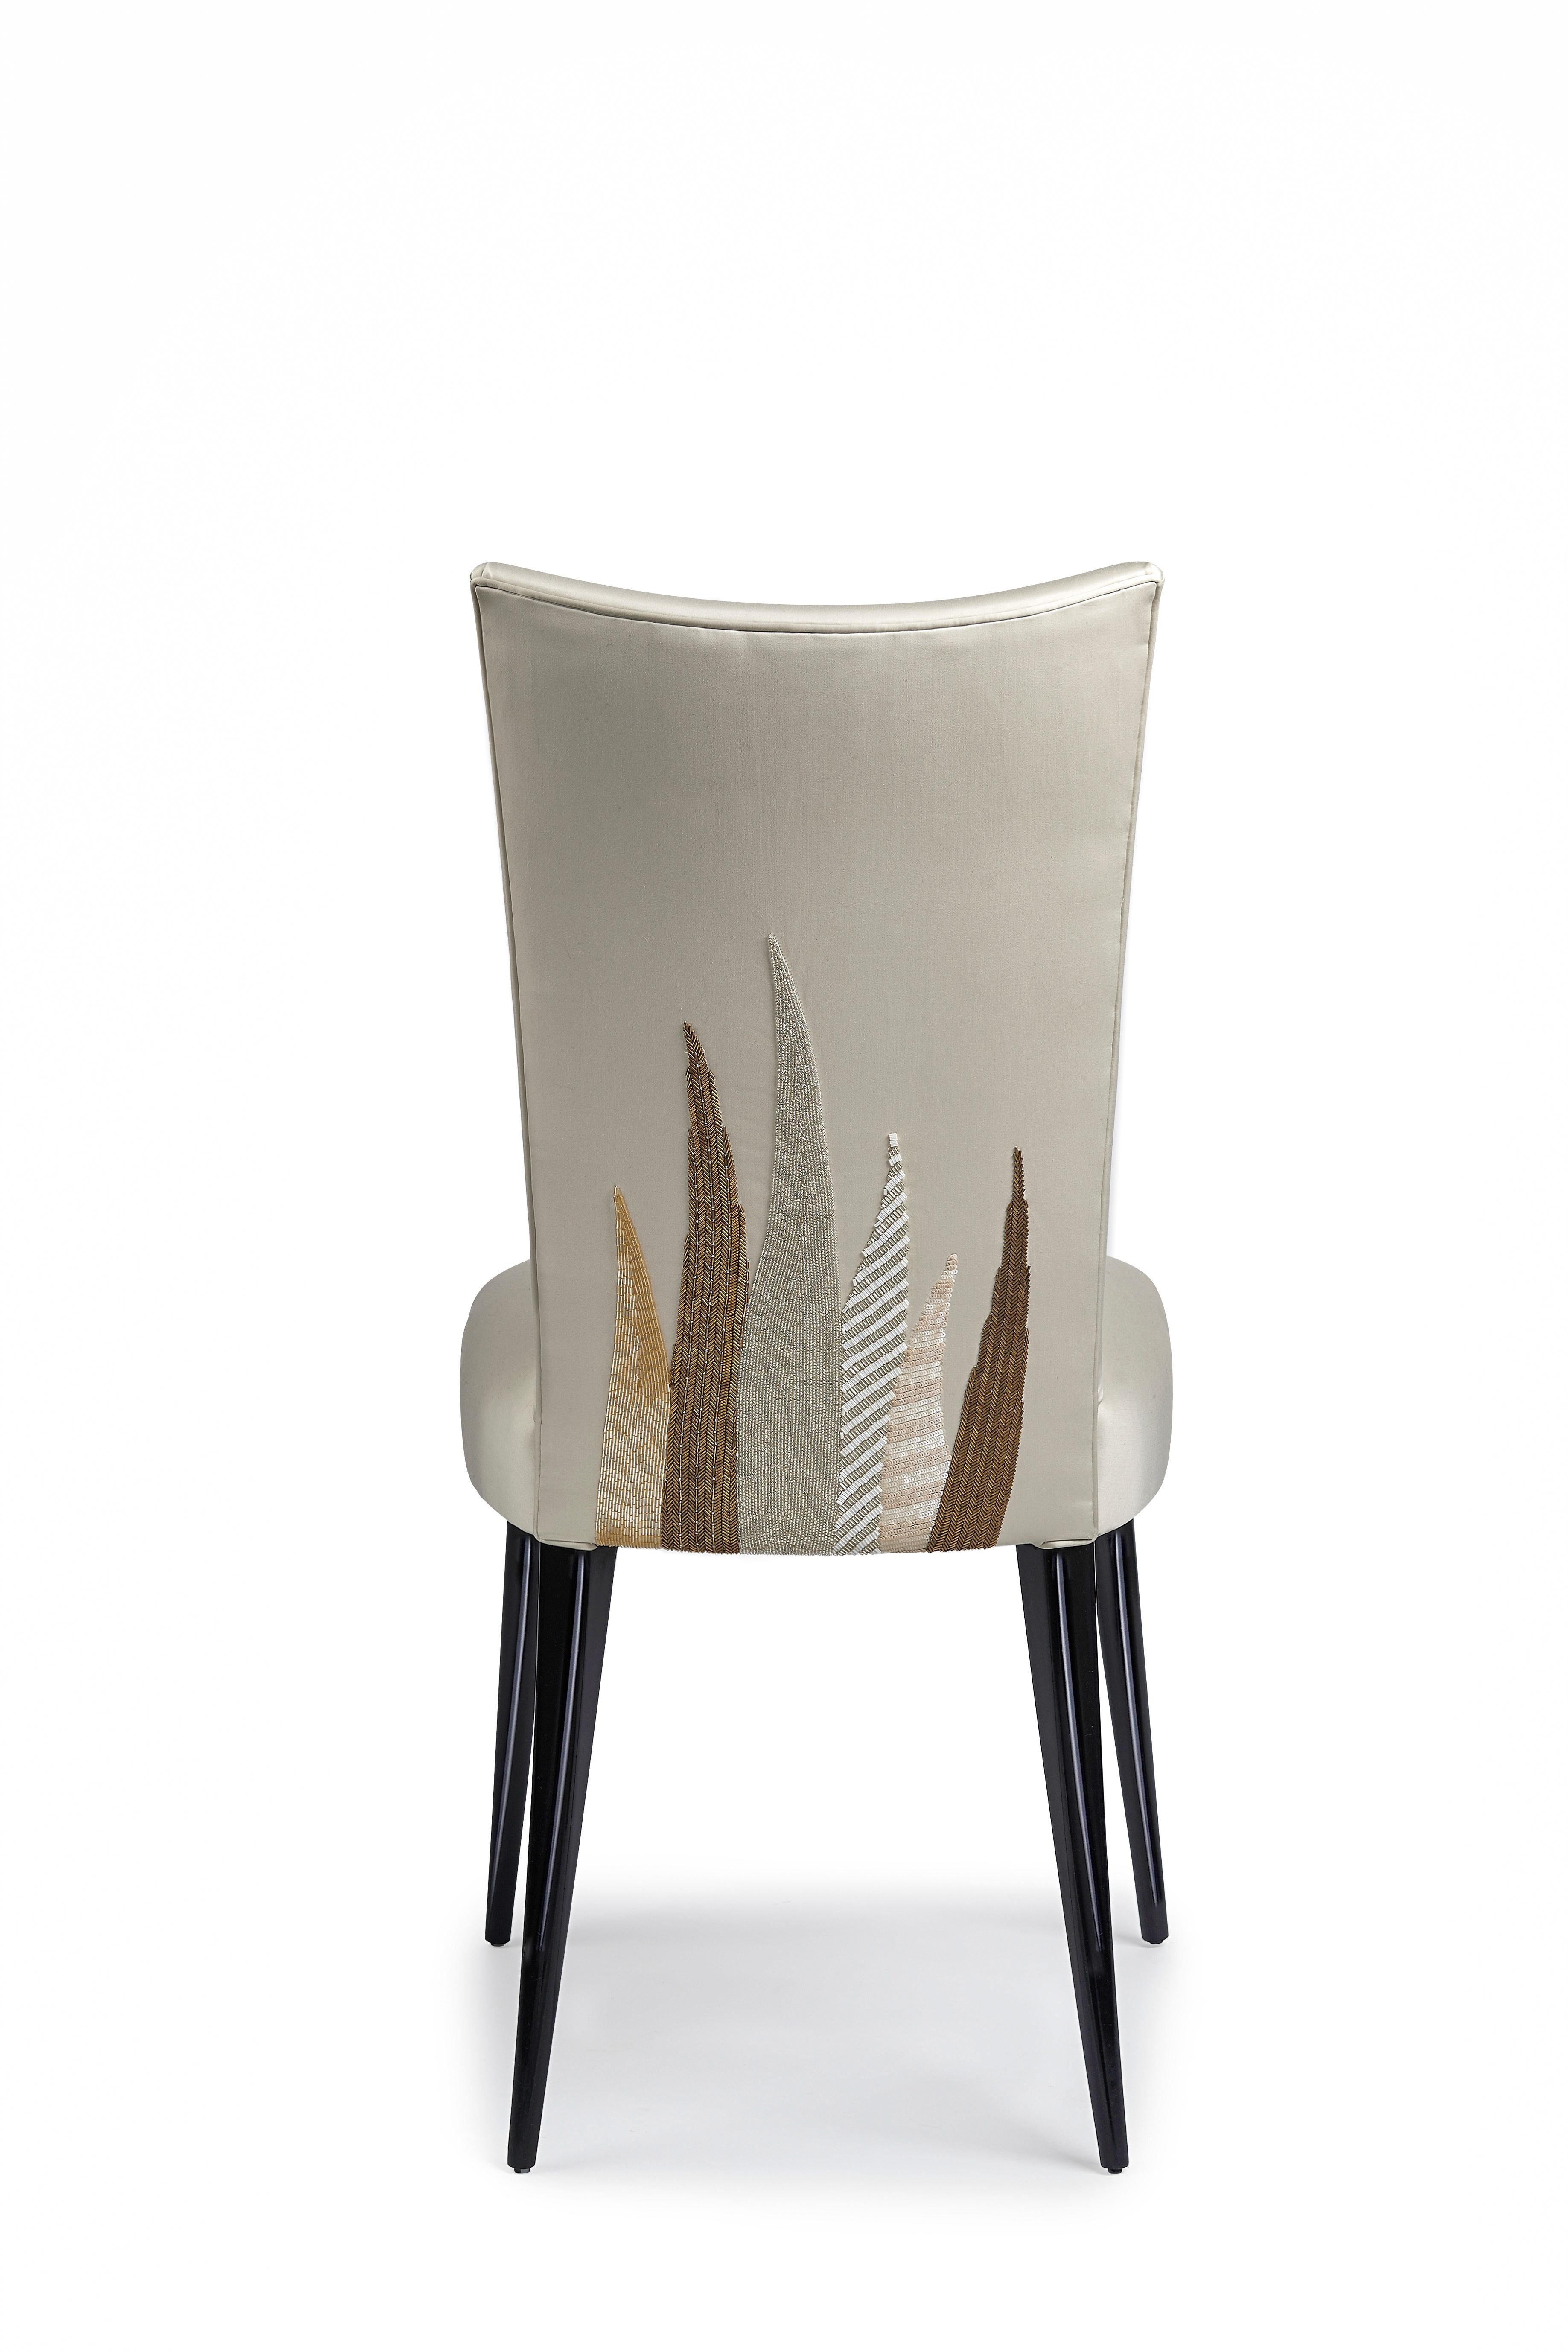 Cotton Aiveen Daly Agave Stiletto Chair  For Sale